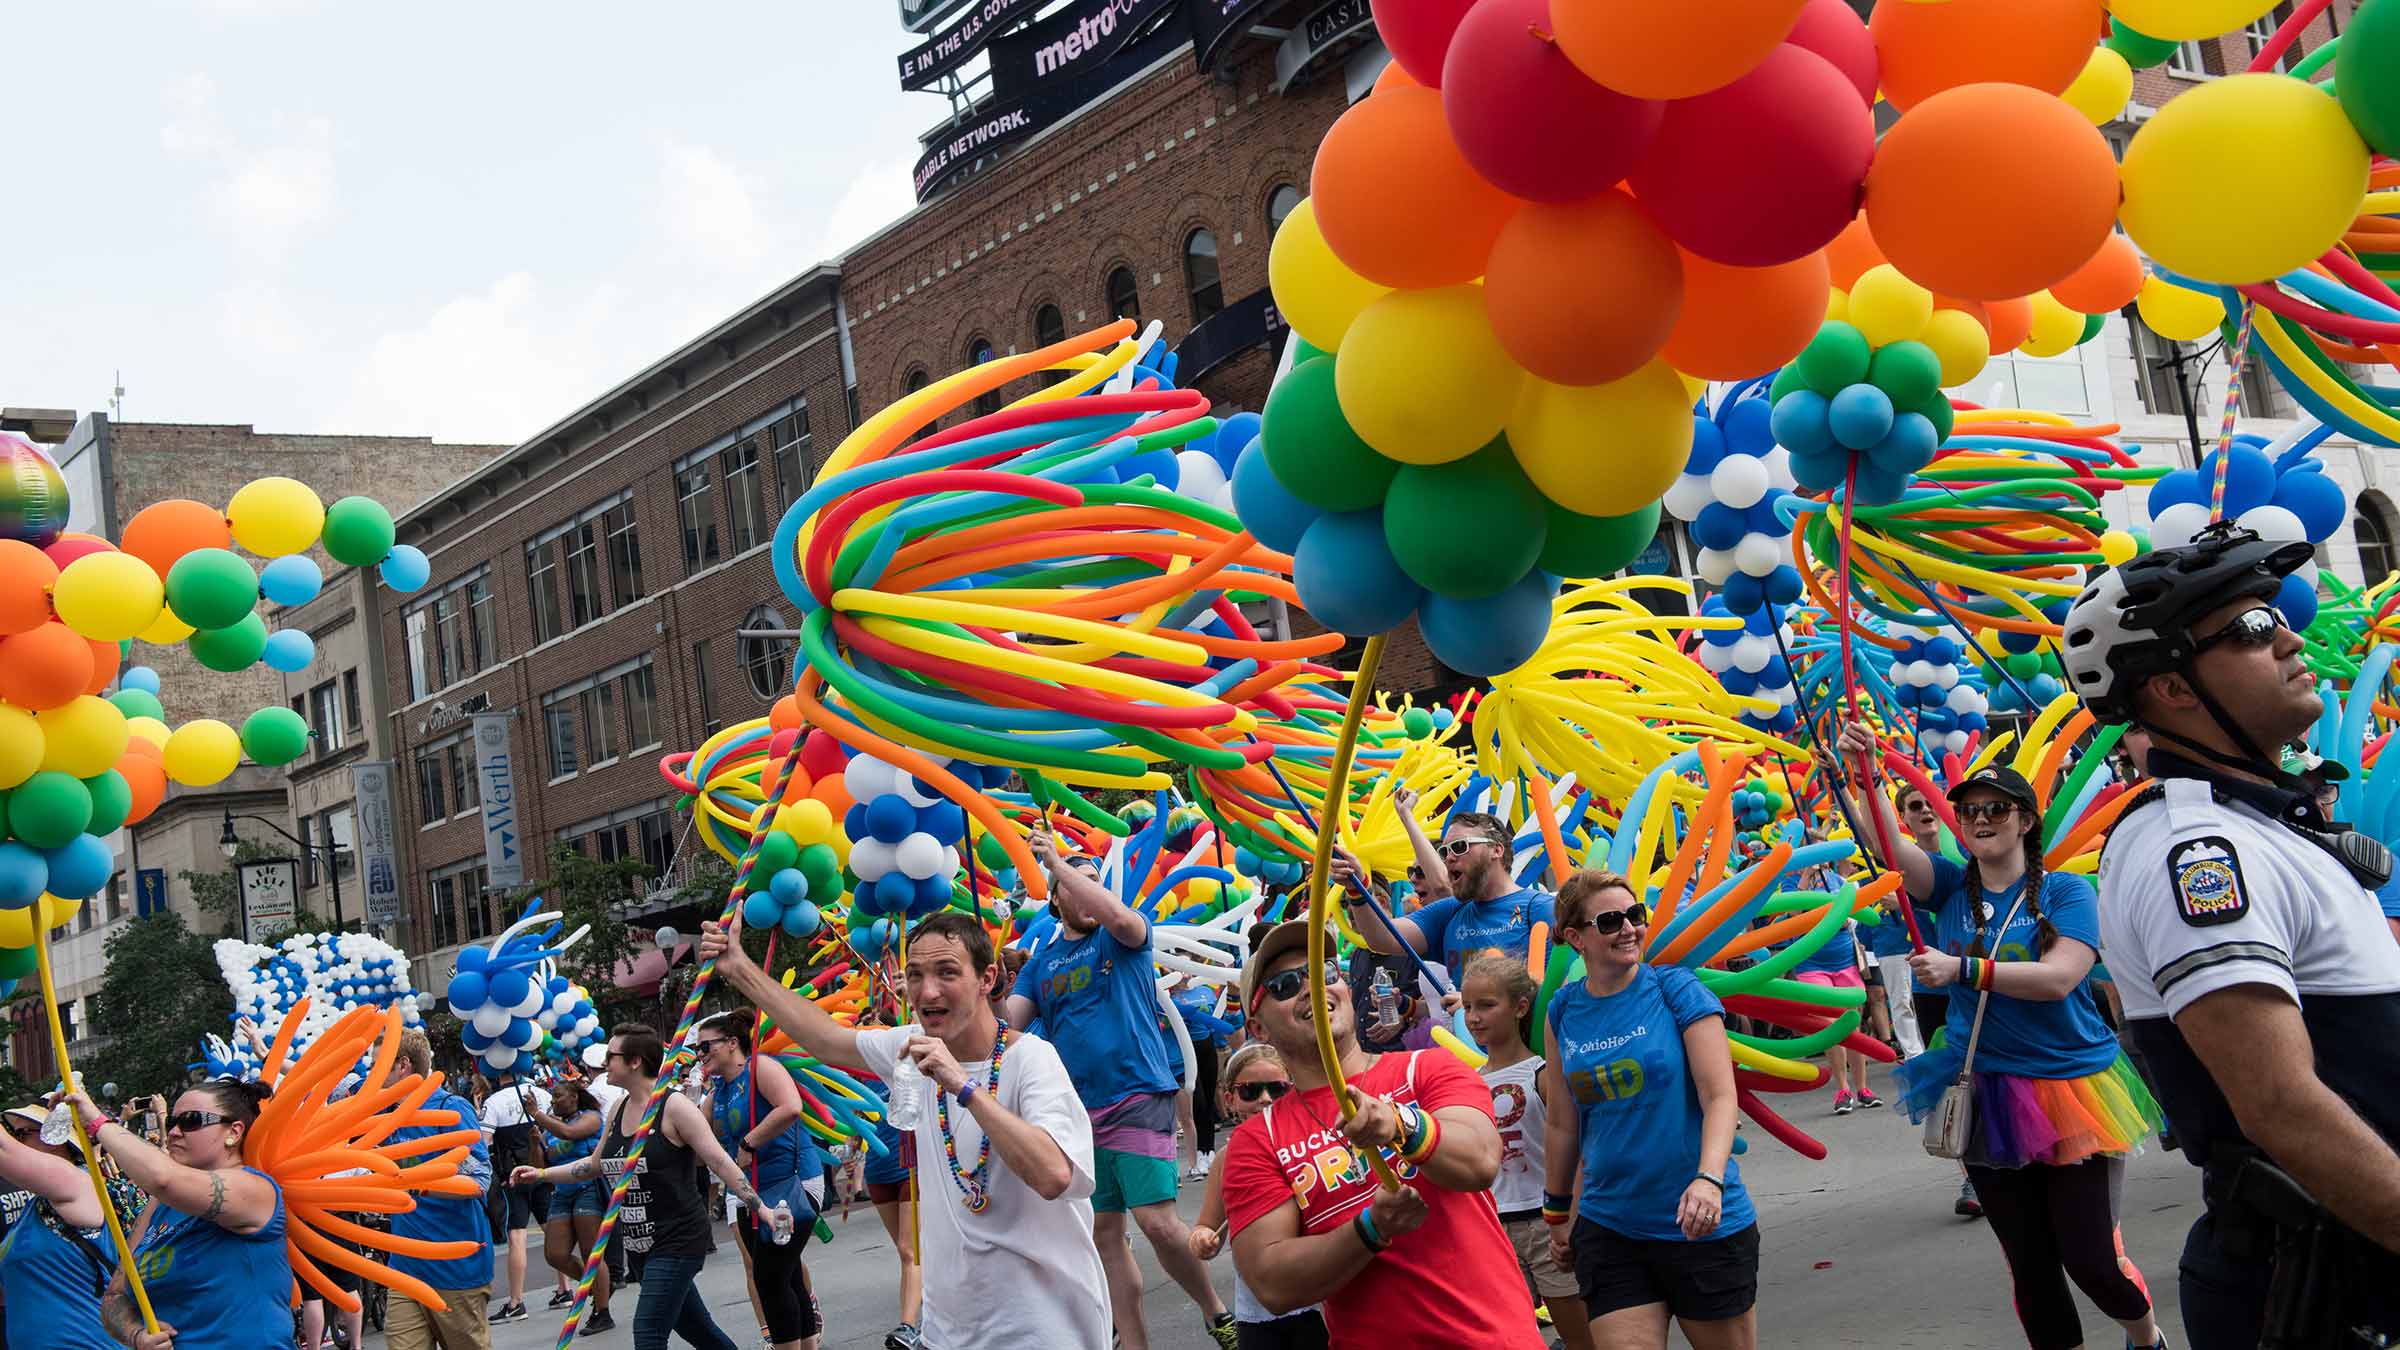 People carrying colorful balloons at the Pride parade